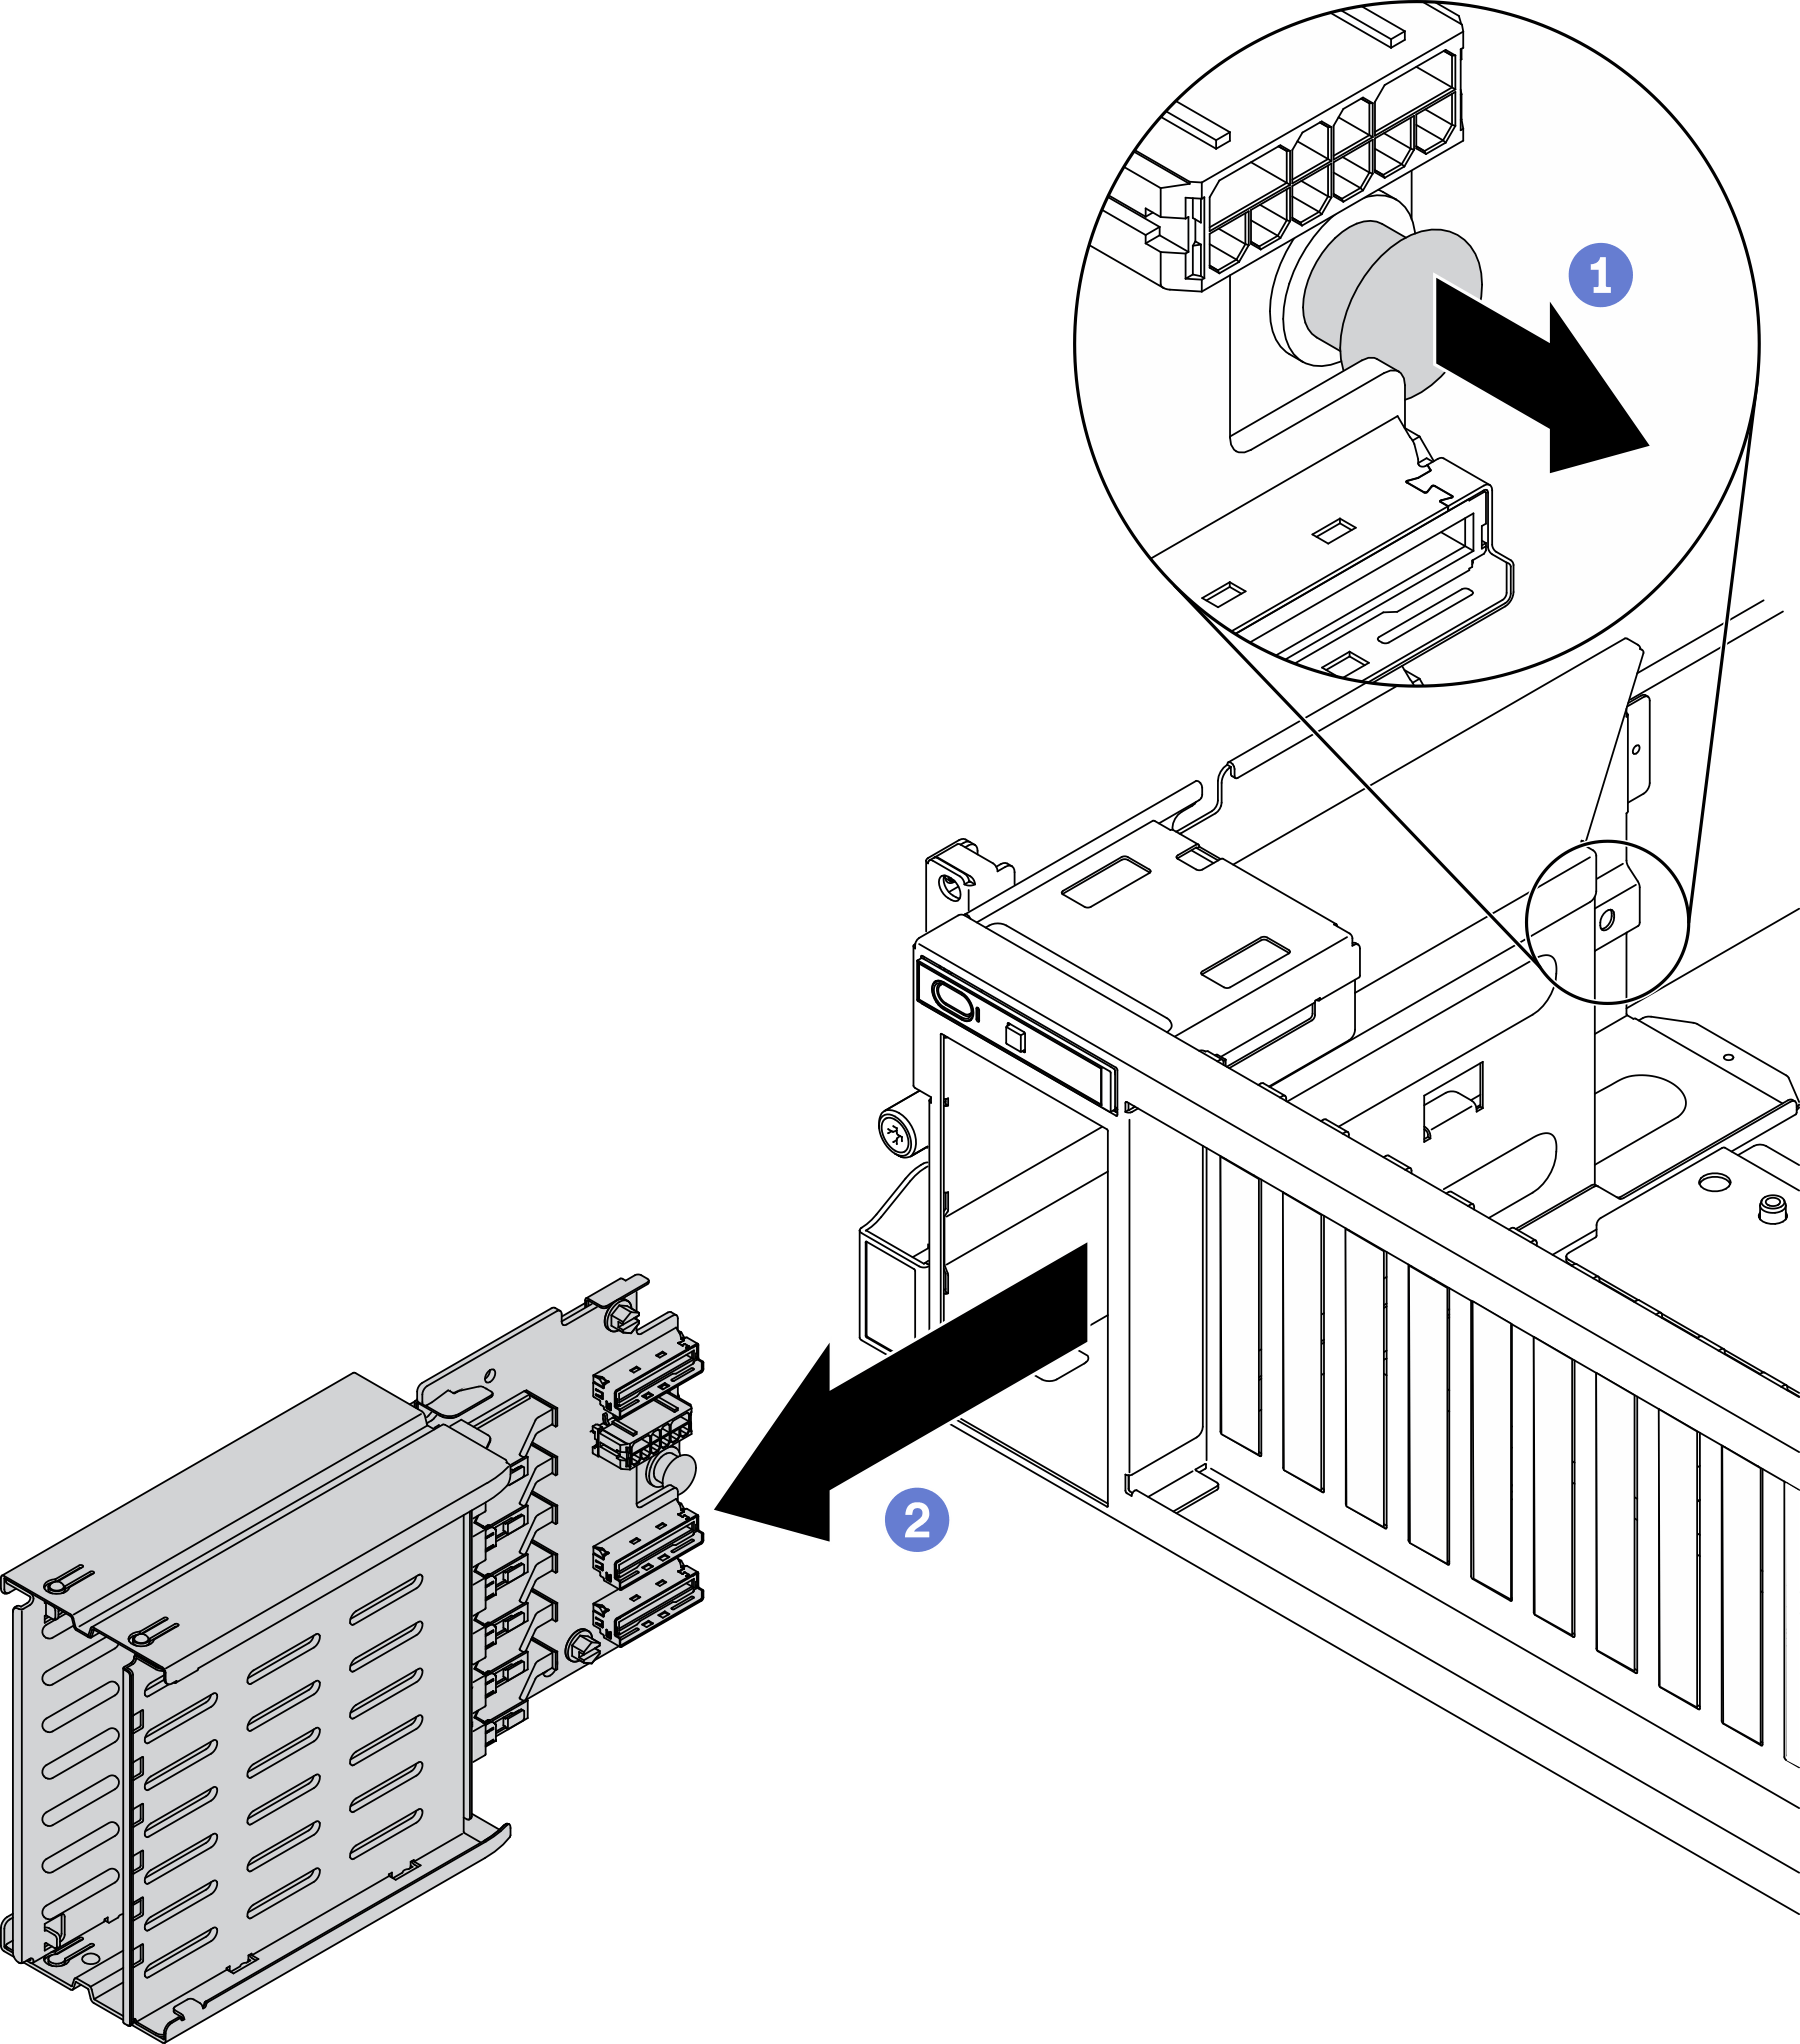 Removing the EDSFF drive cage assembly